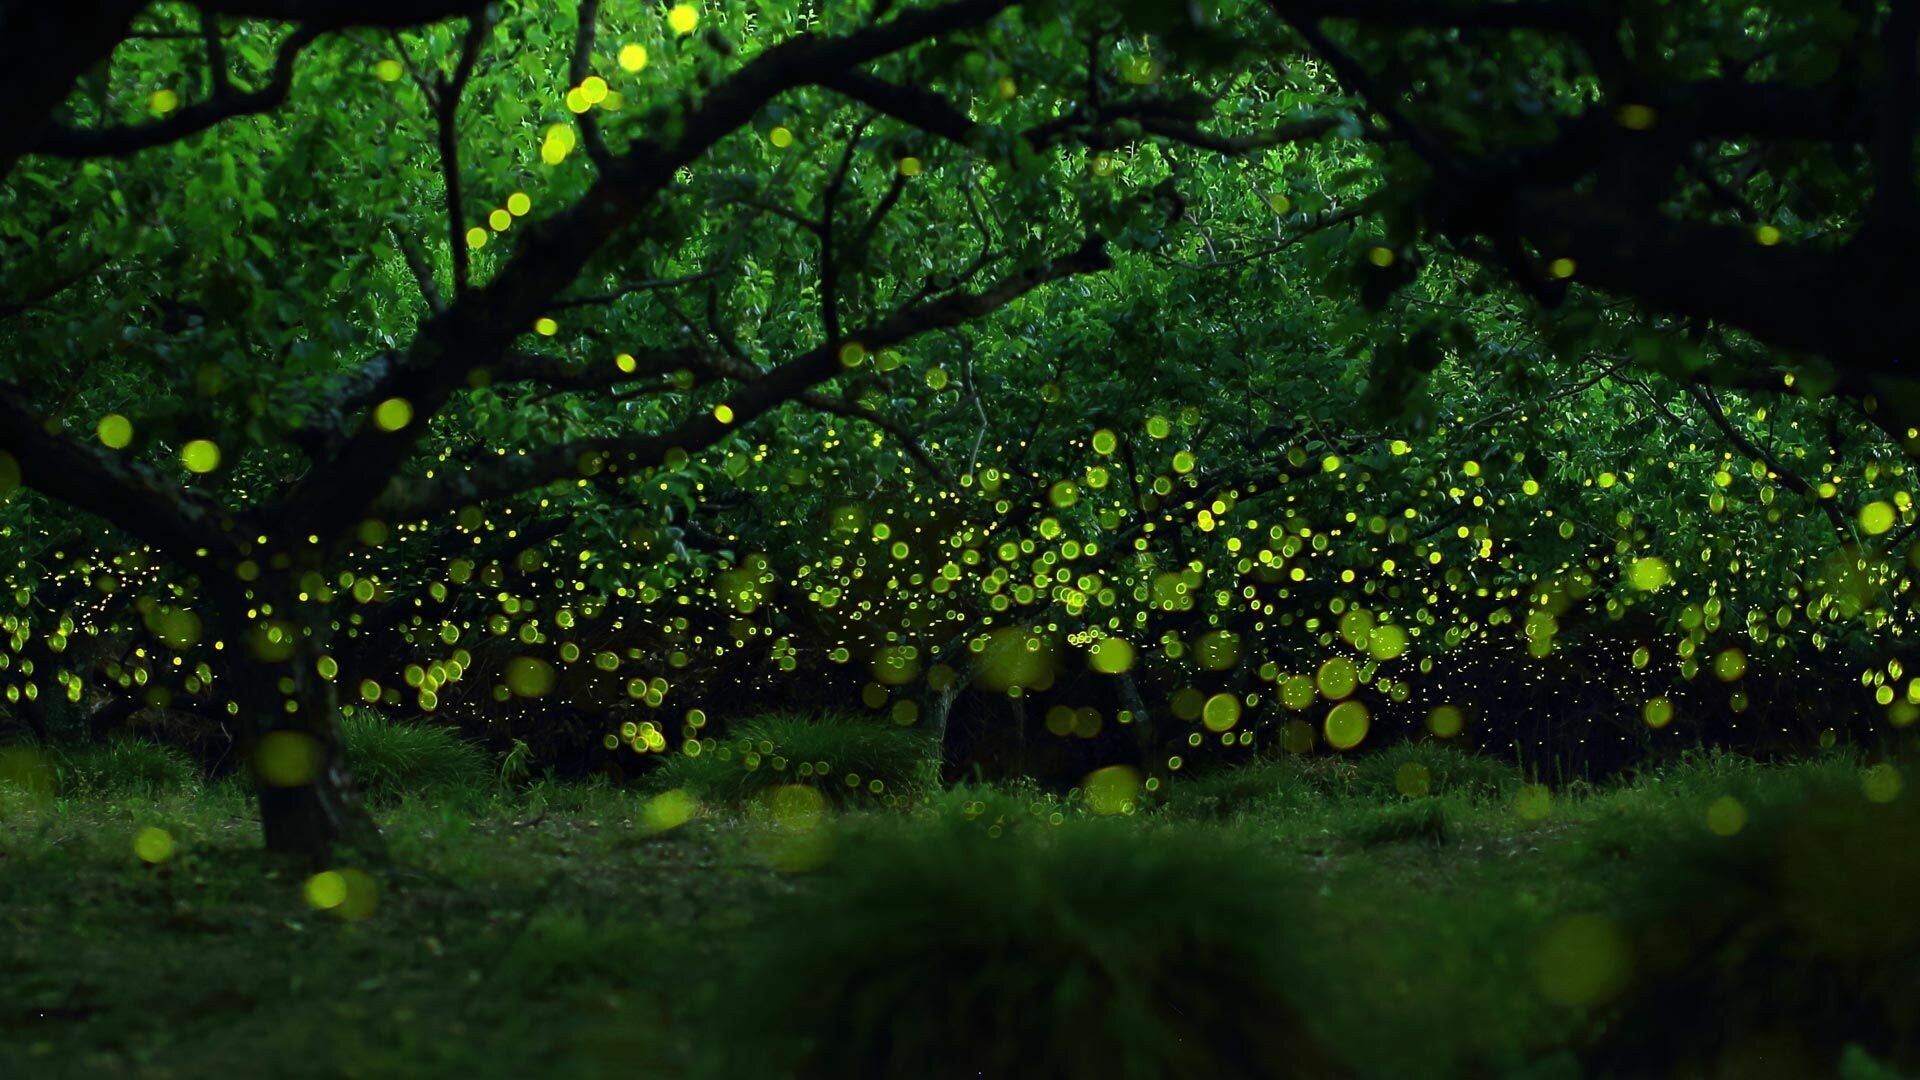 Firefly (Insect): Lightning bugs, Soft-bodied bioluminescent beetles. 1920x1080 Full HD Background.